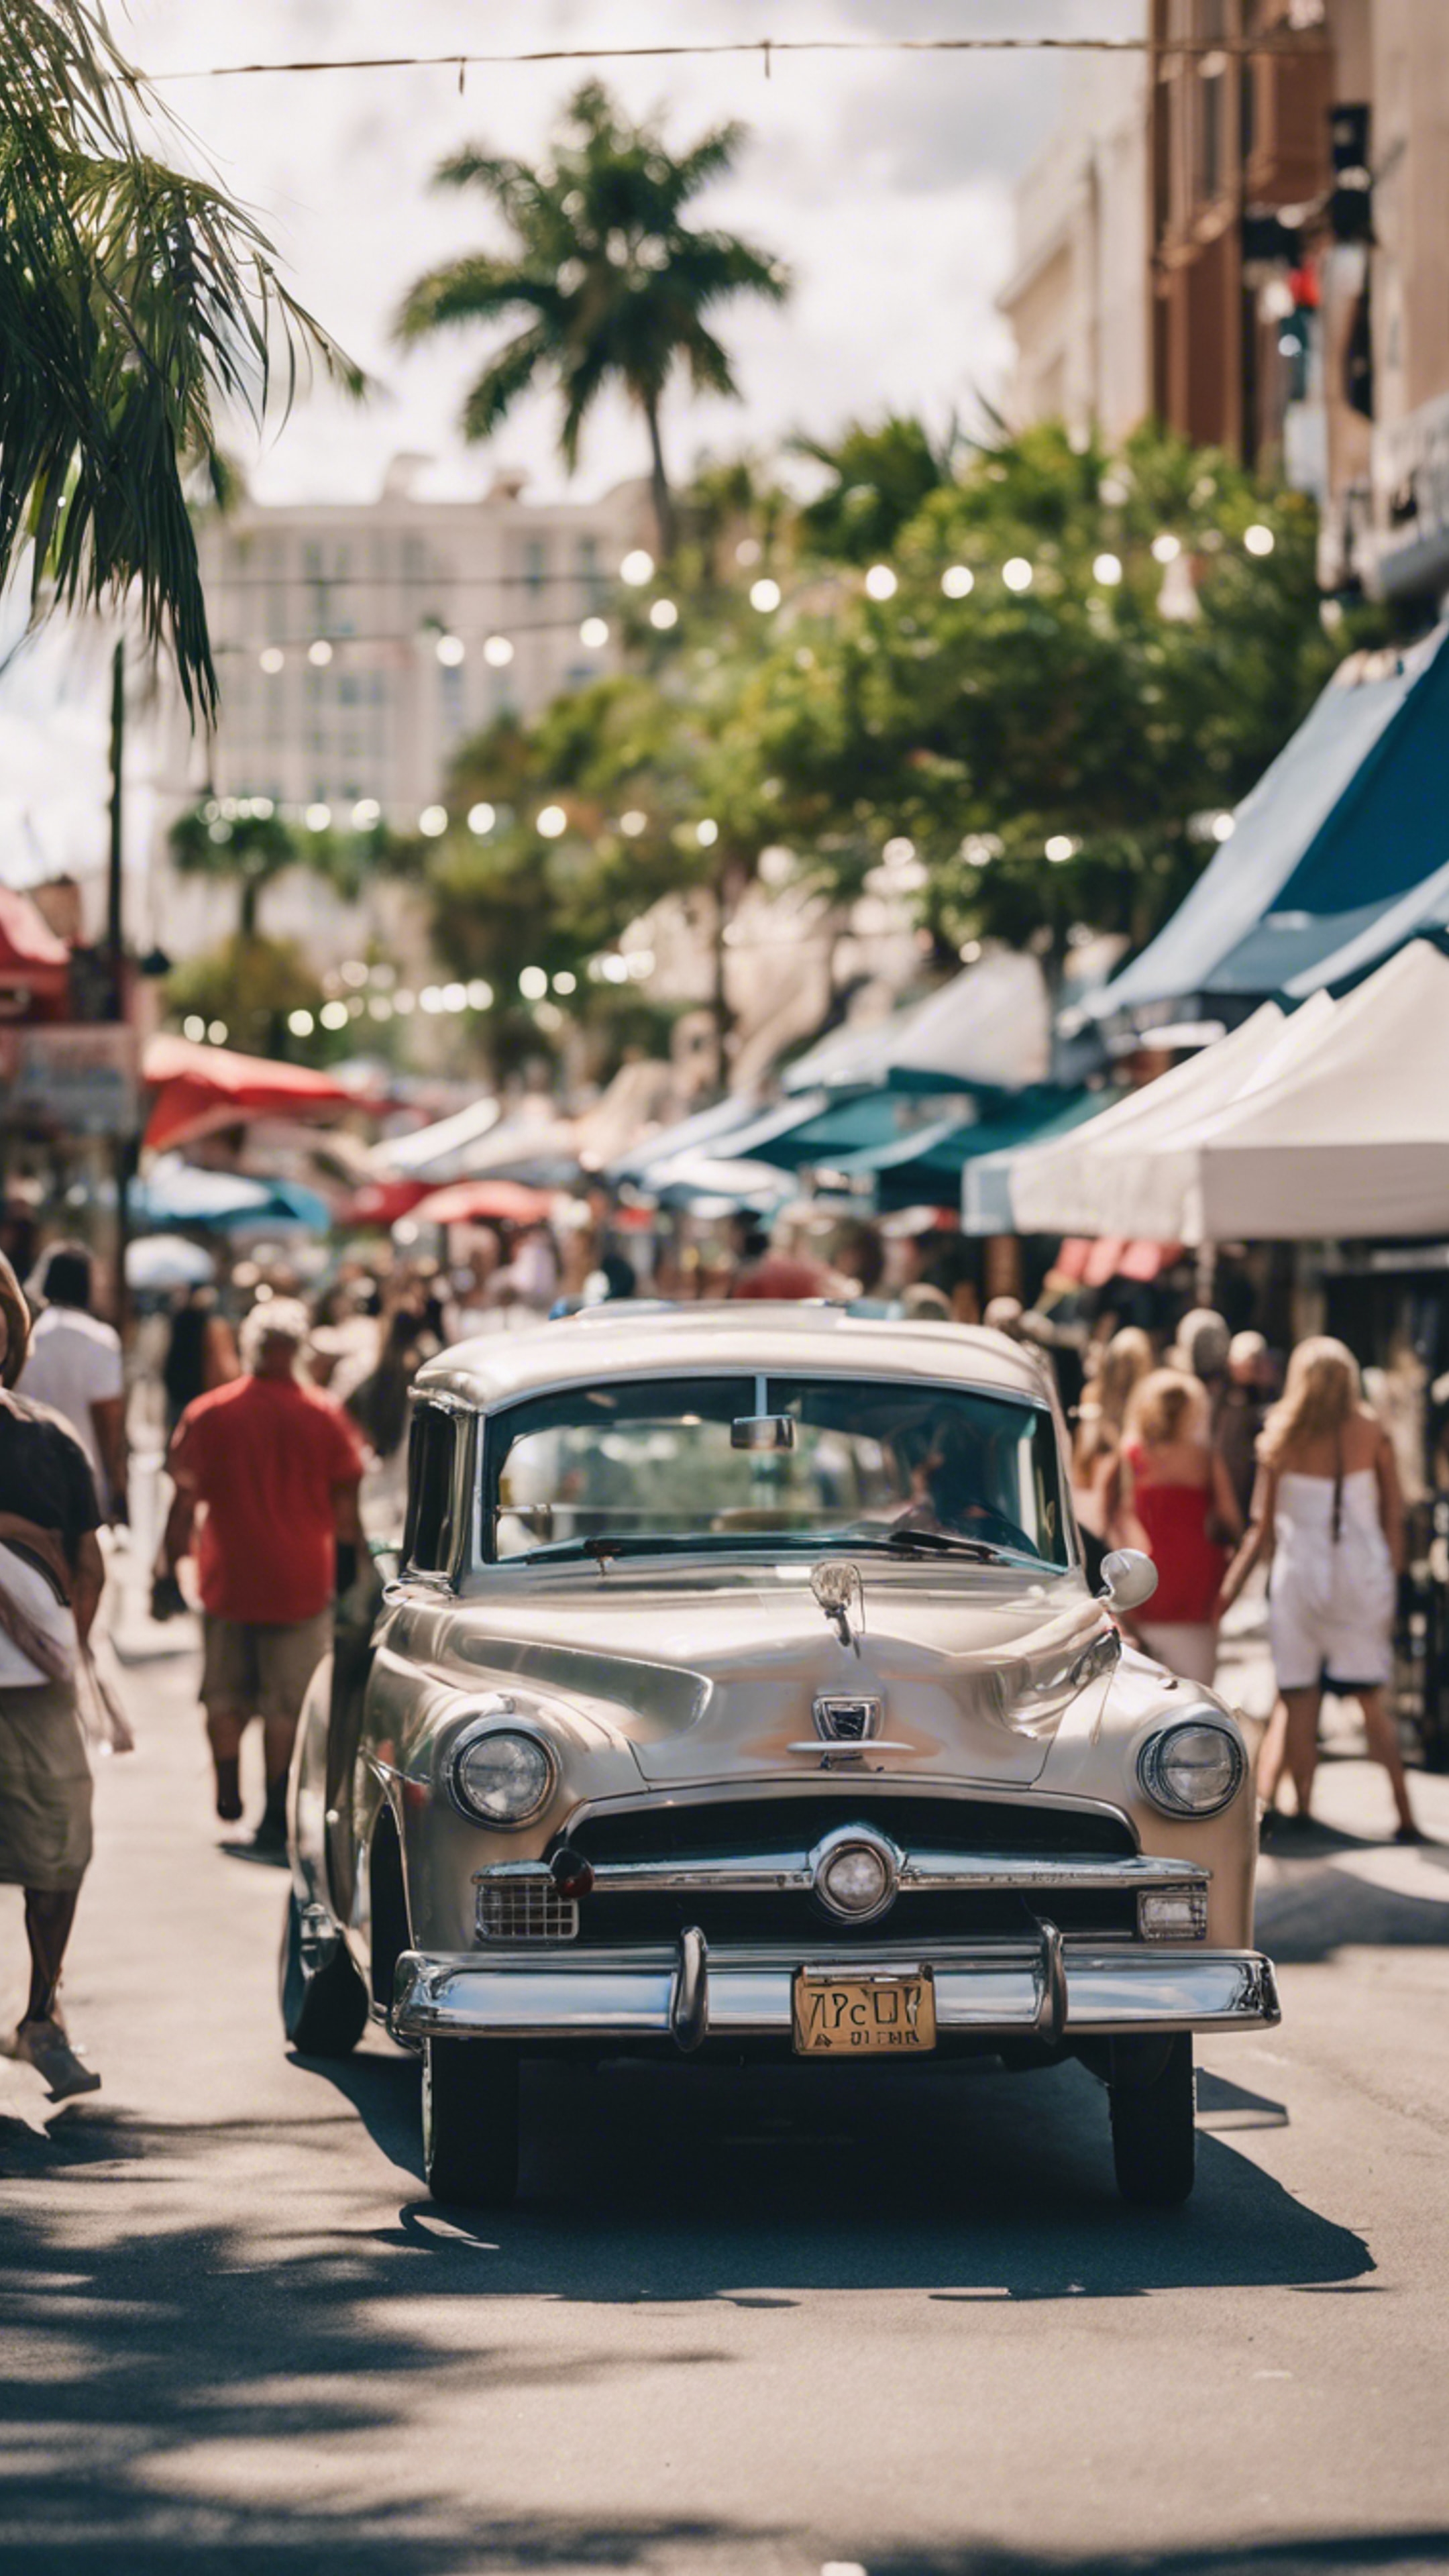 The art and culture-filled streets of downtown West Palm Beach on a Saturday Market Day. 墙纸[9e1e82f0b2784fd0ae58]